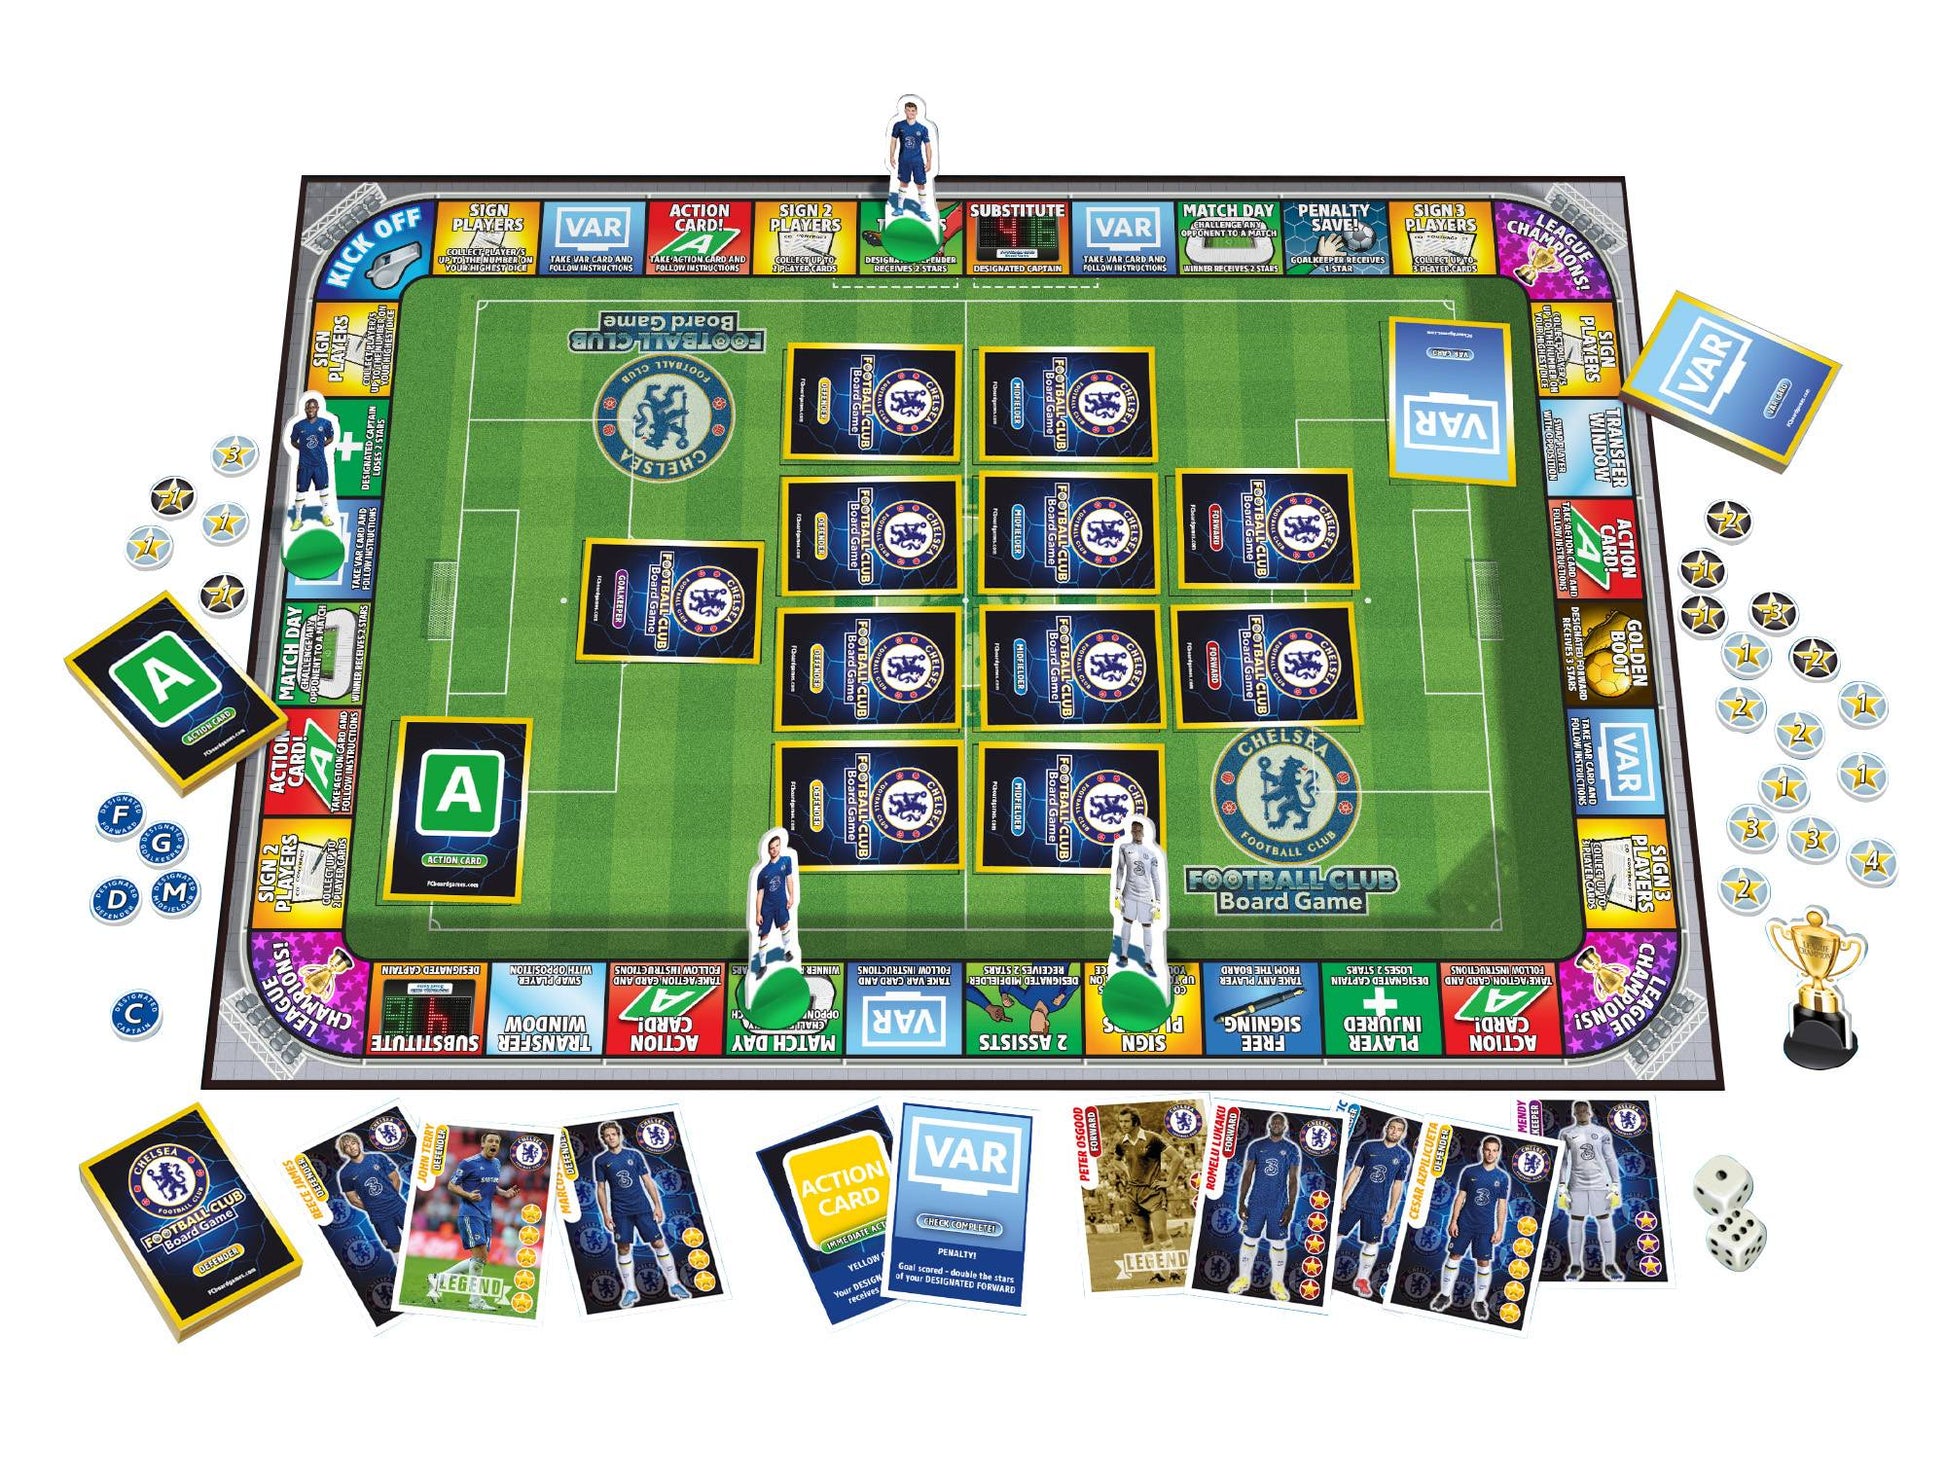 Chelsea Football Club Board Game - with this 2021 players!